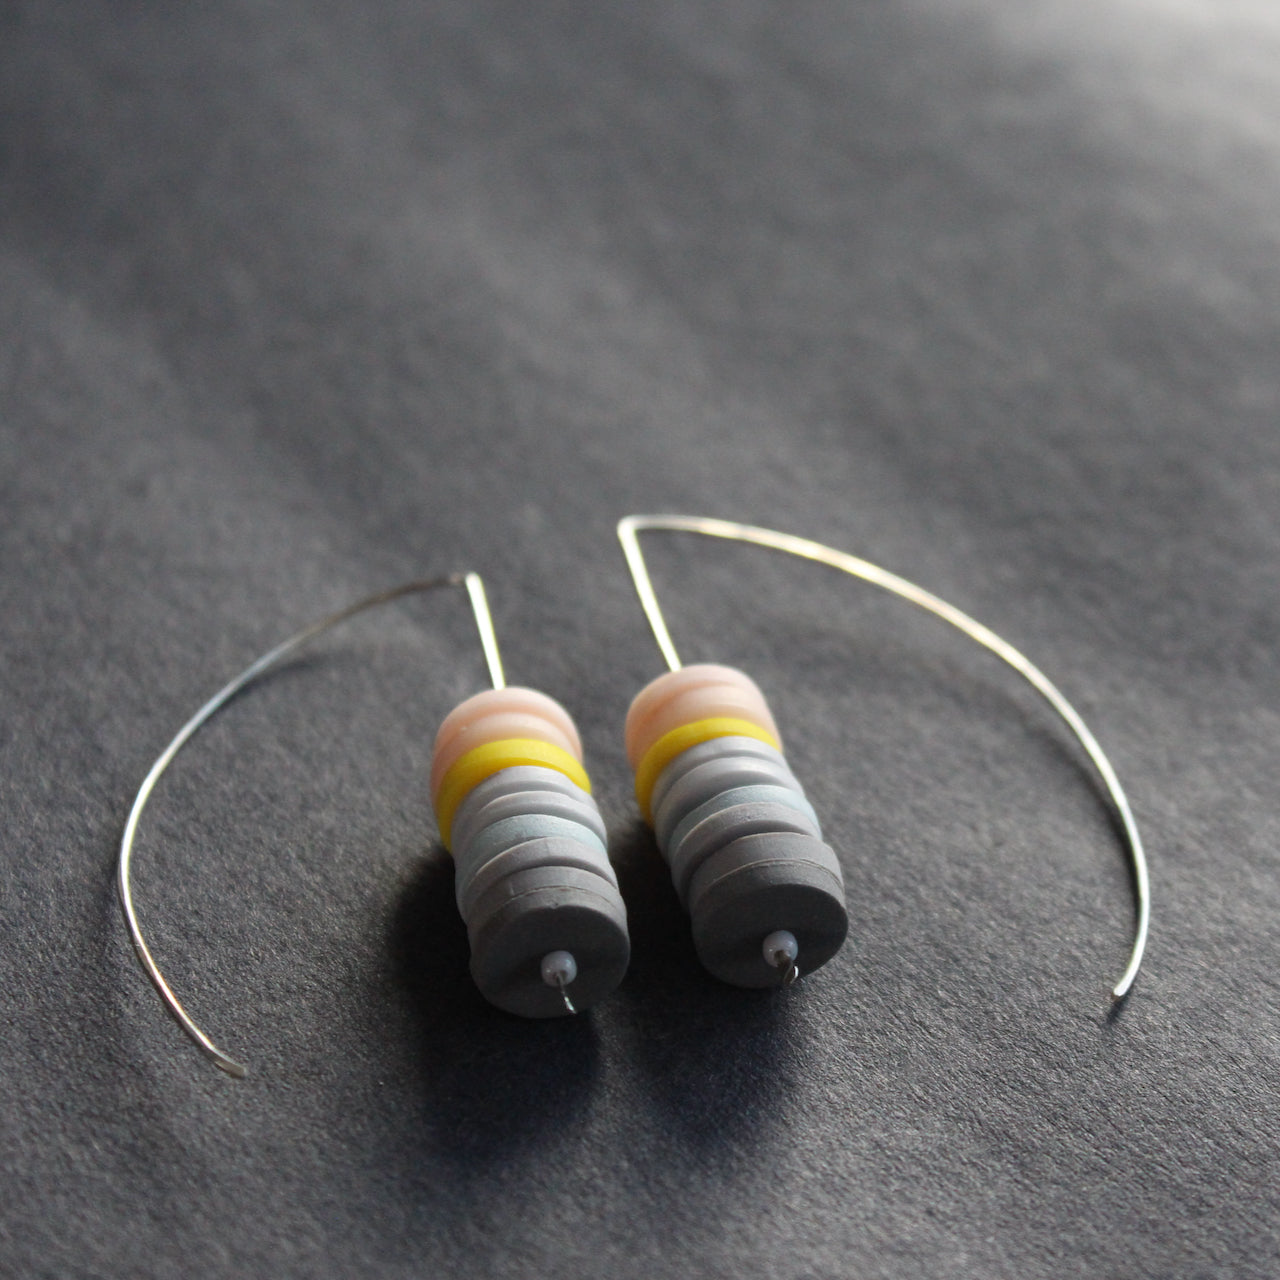 earrings made of small discs on top of each other in shades of grey and pink by jewellery designer Clare Lloyd 